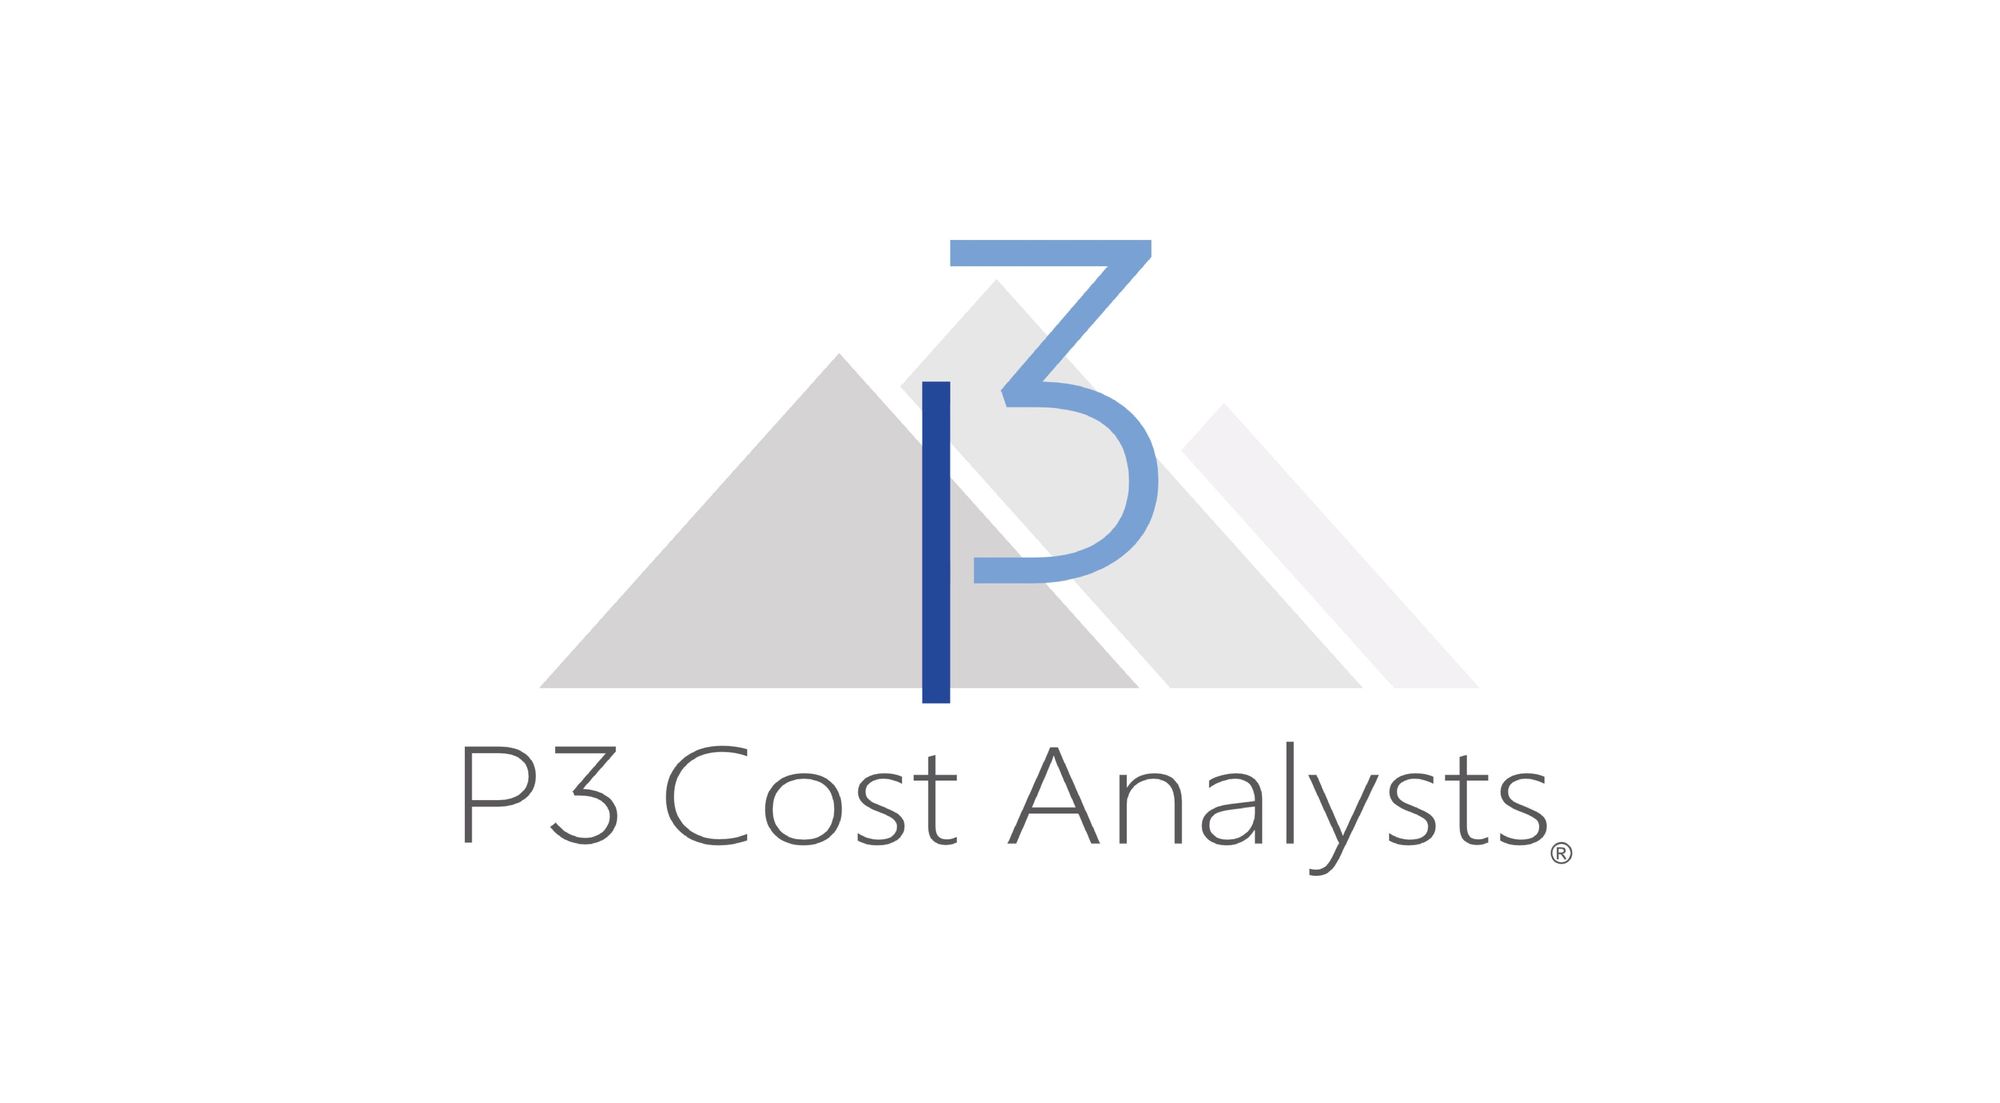 Saving Money for Your Business - P3 Cost Analysts